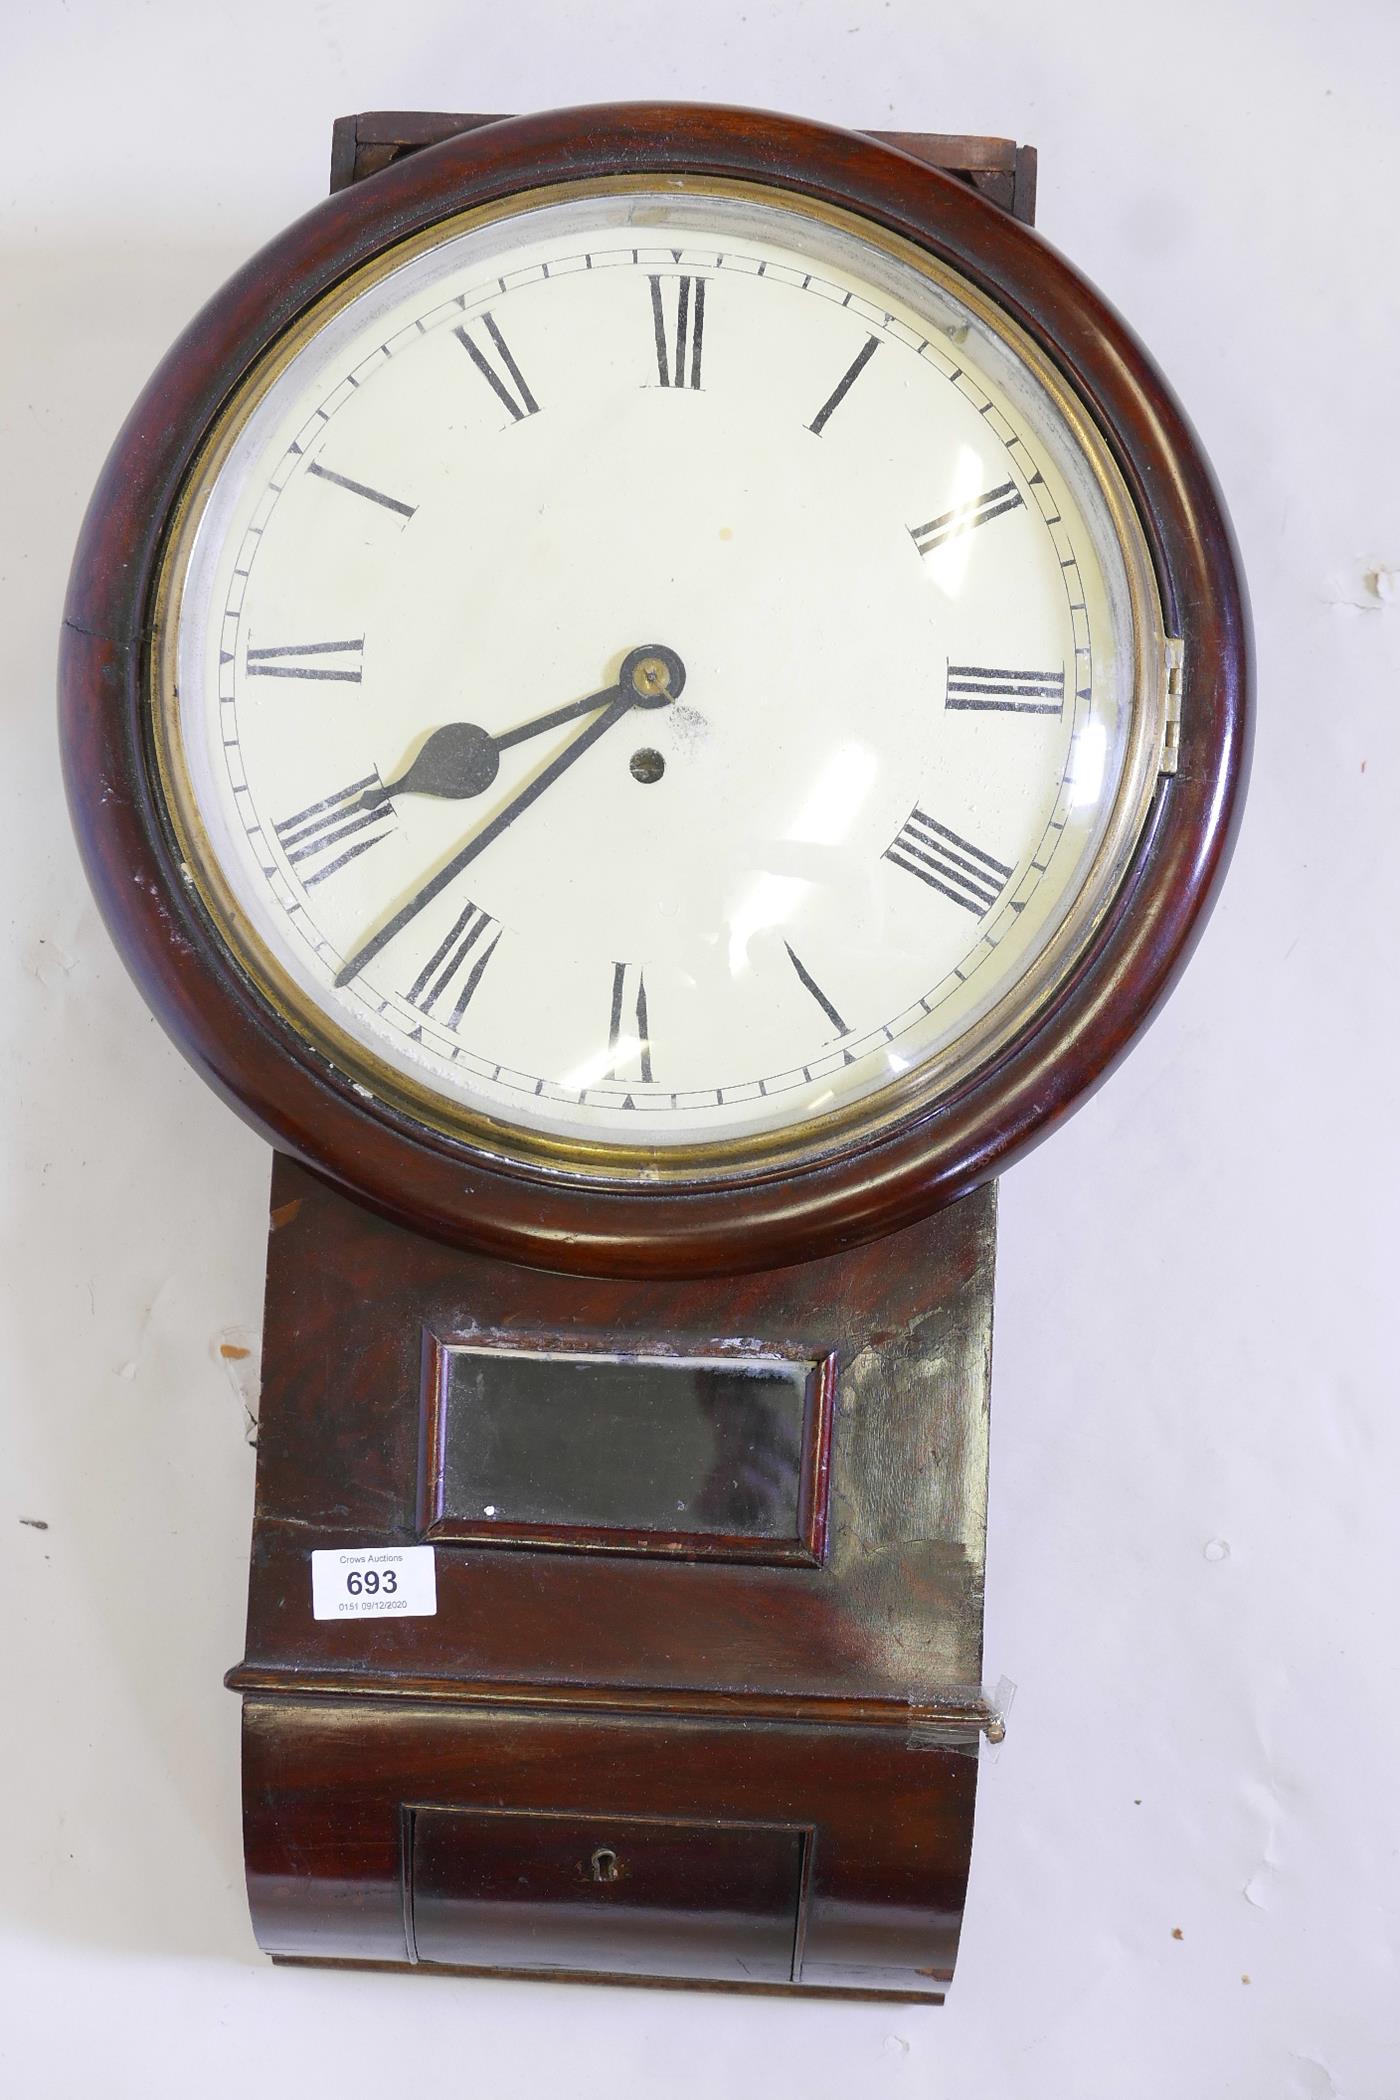 A mahogany cased fusee wall clock, with convex glass and painted 12" dial with Roman numerals and